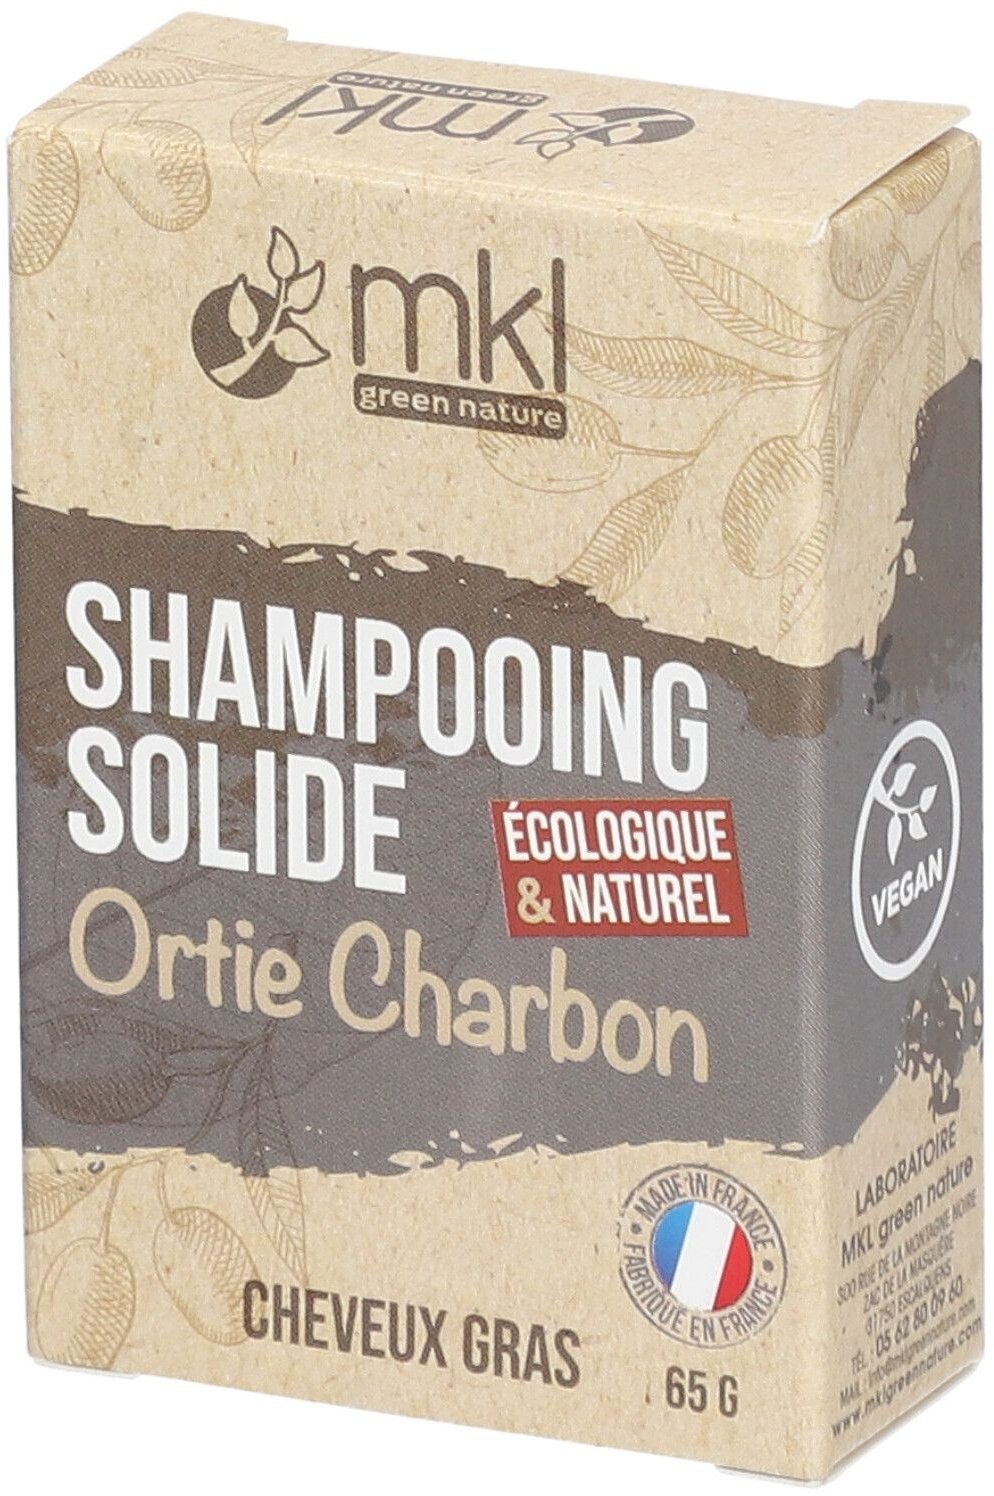 mkl SHAMPOOING SOLIDE 65 G - ORTIES CHARBON 65 g shampooing